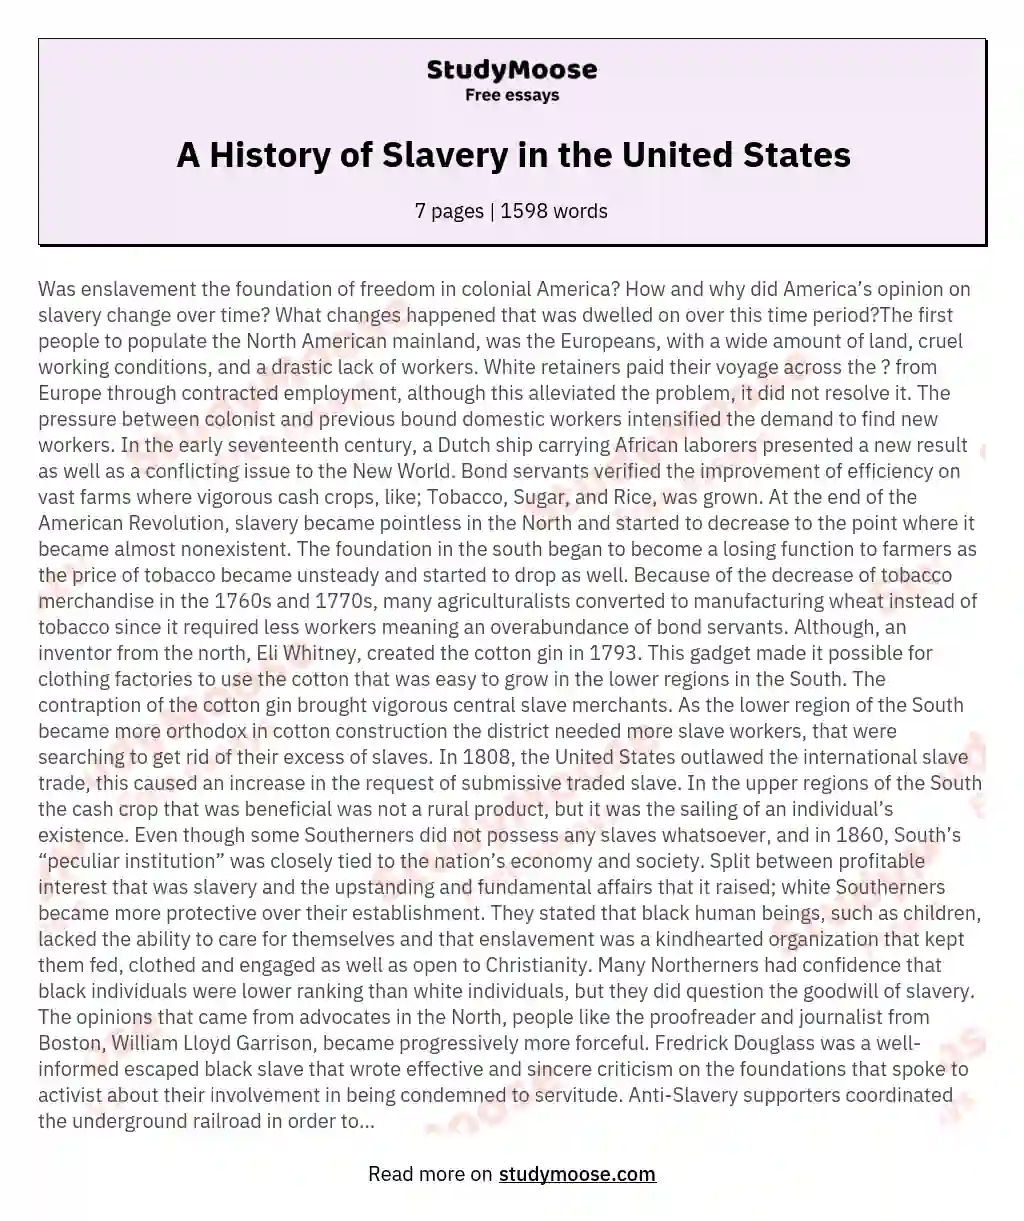 A History of Slavery in the United States essay